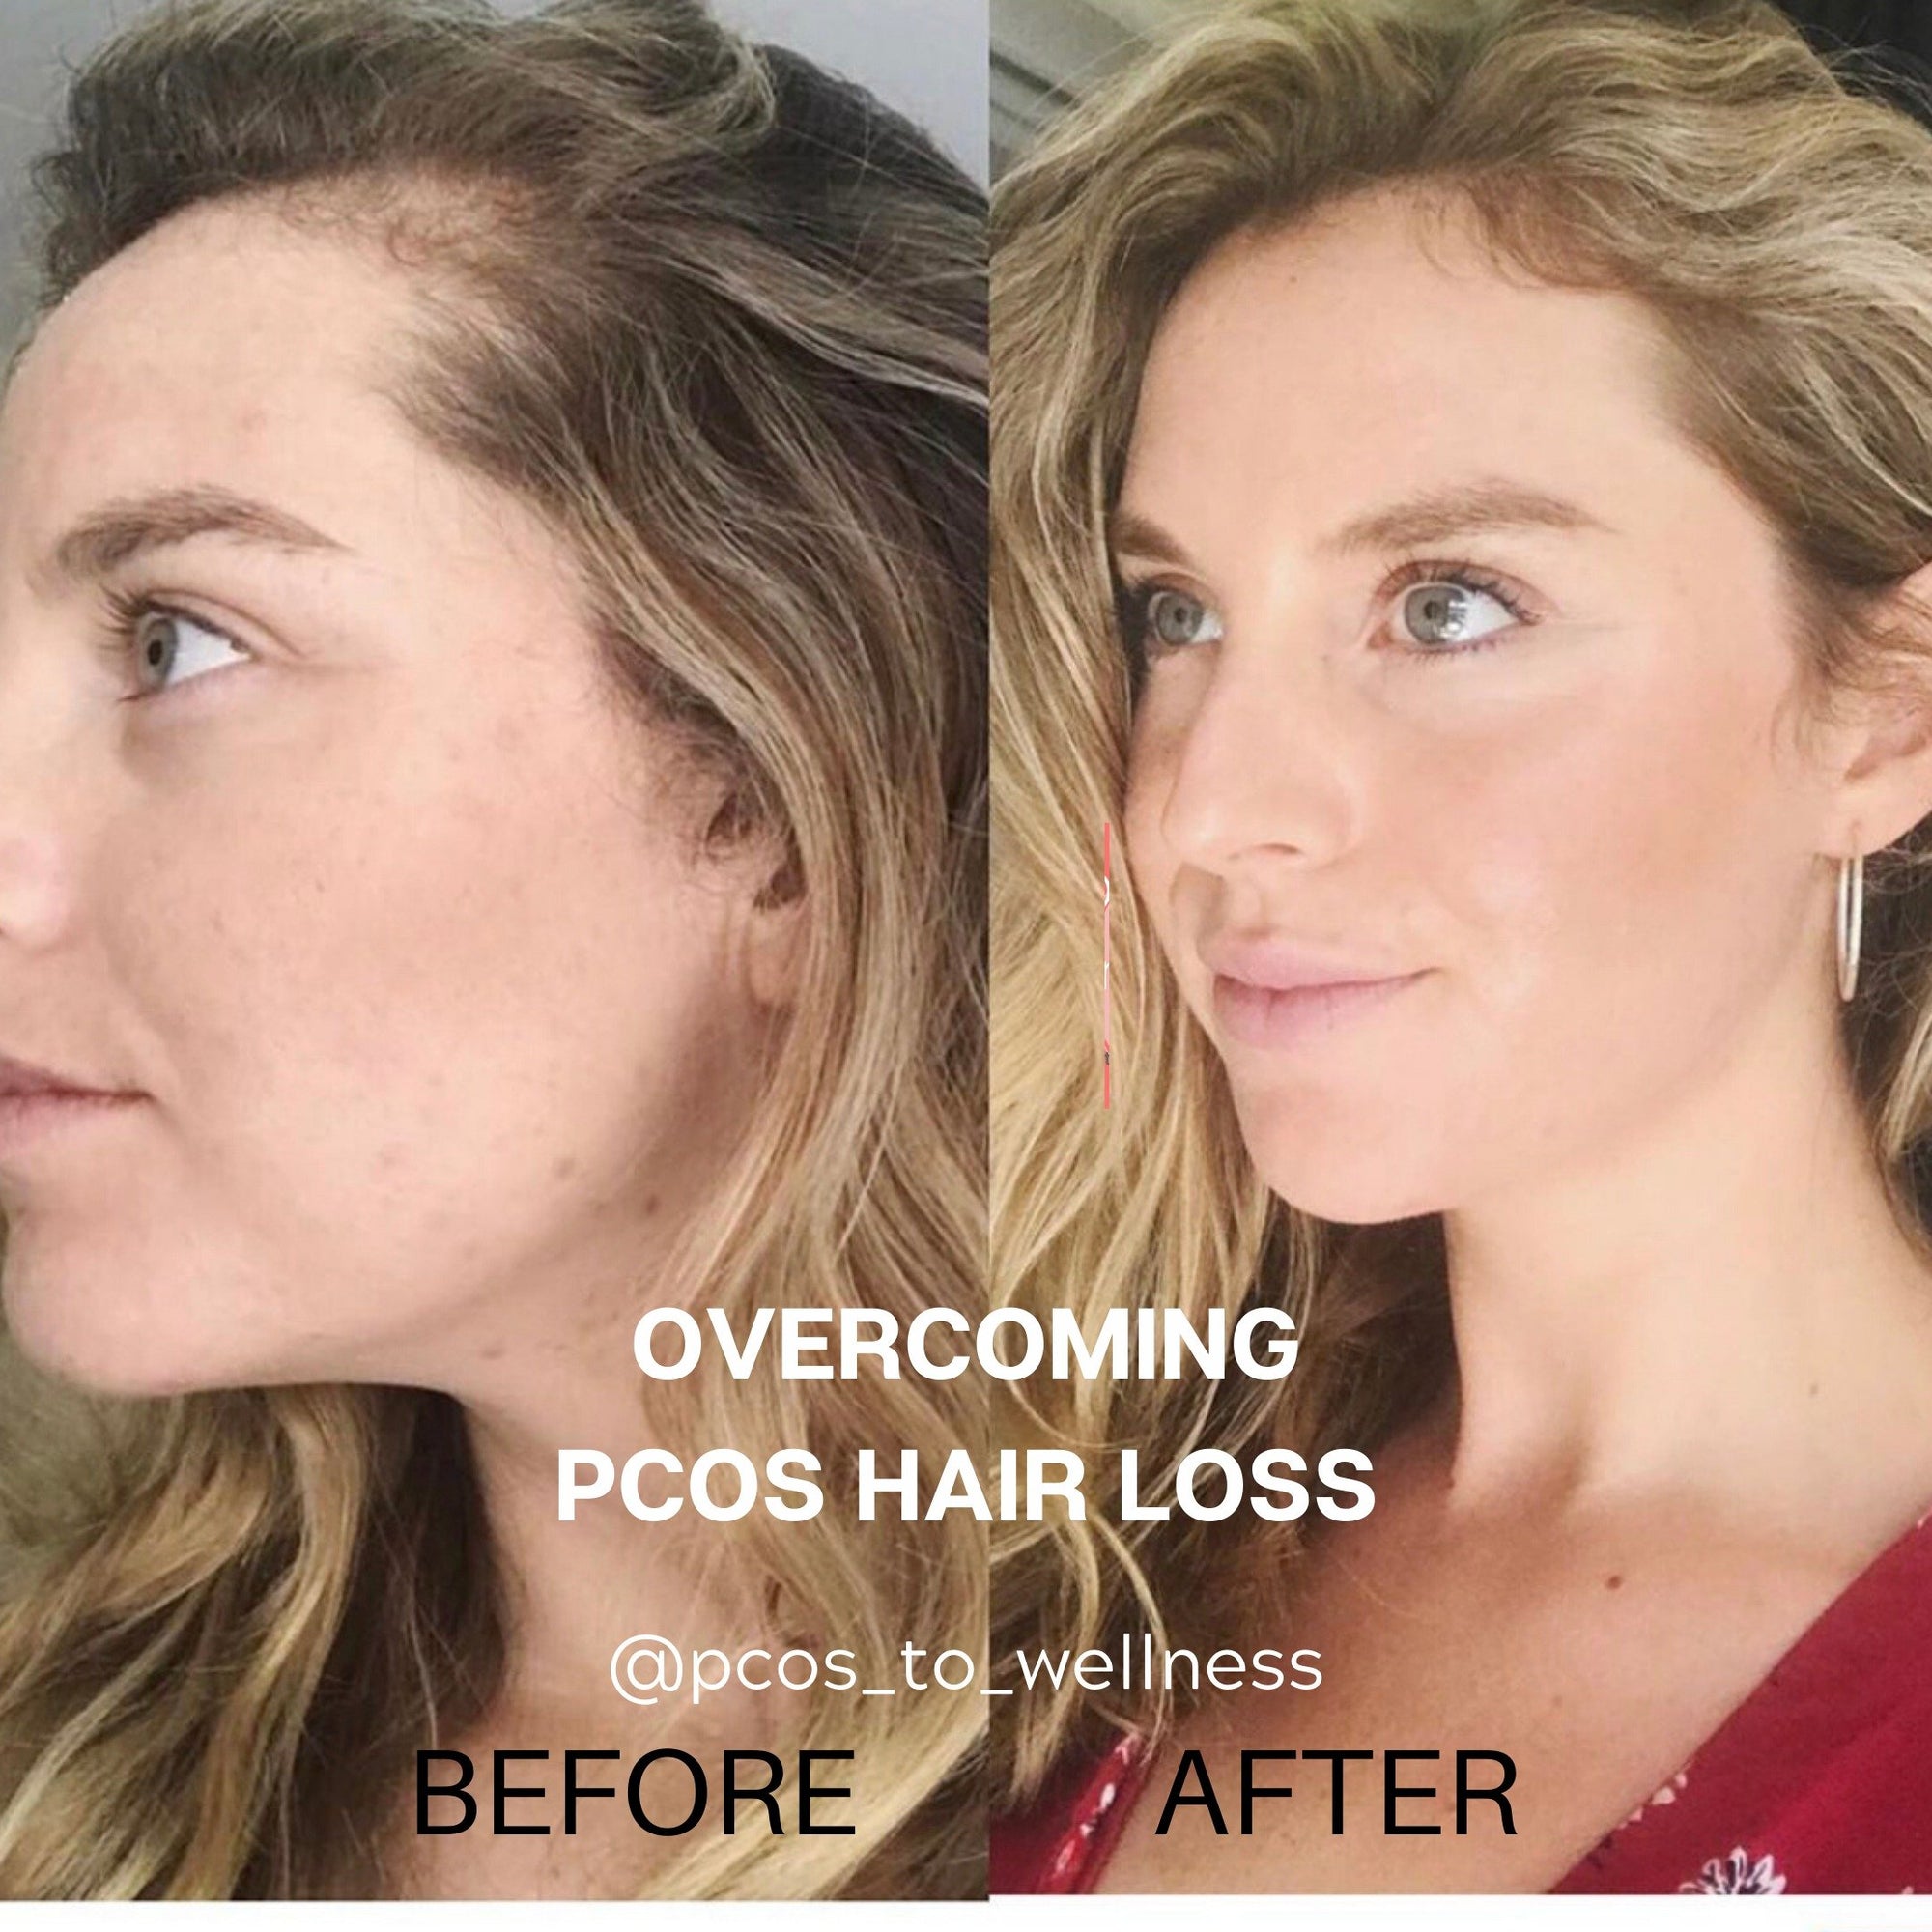 6 tips to help treat PCOS hair loss